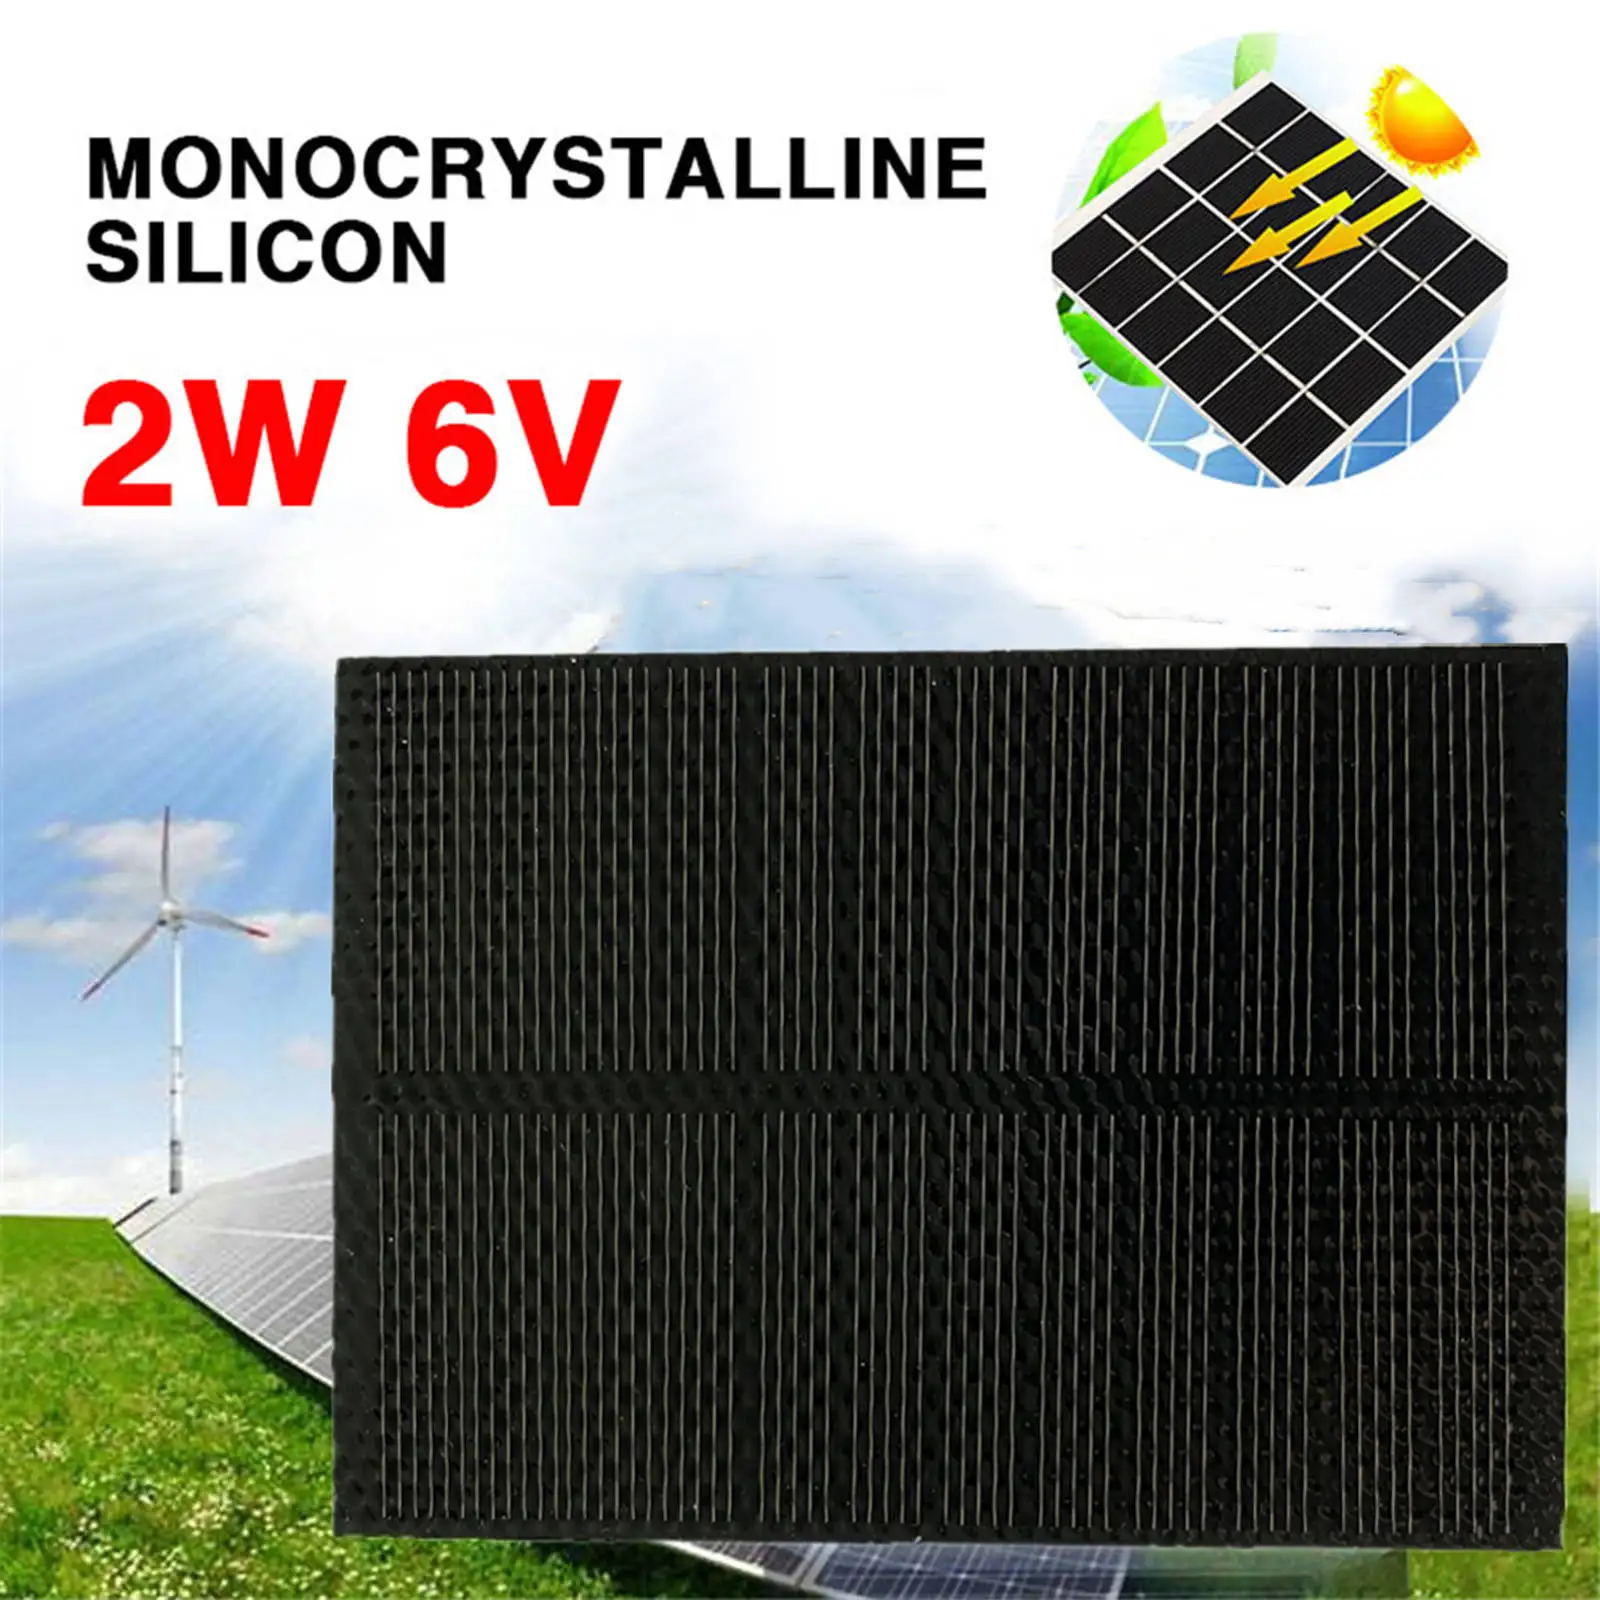 Portable Solar Power Panel Module Battery Charger Monocrystalline 2W DIY for Cell Phone Chargers Camping Light Toys RV Projects